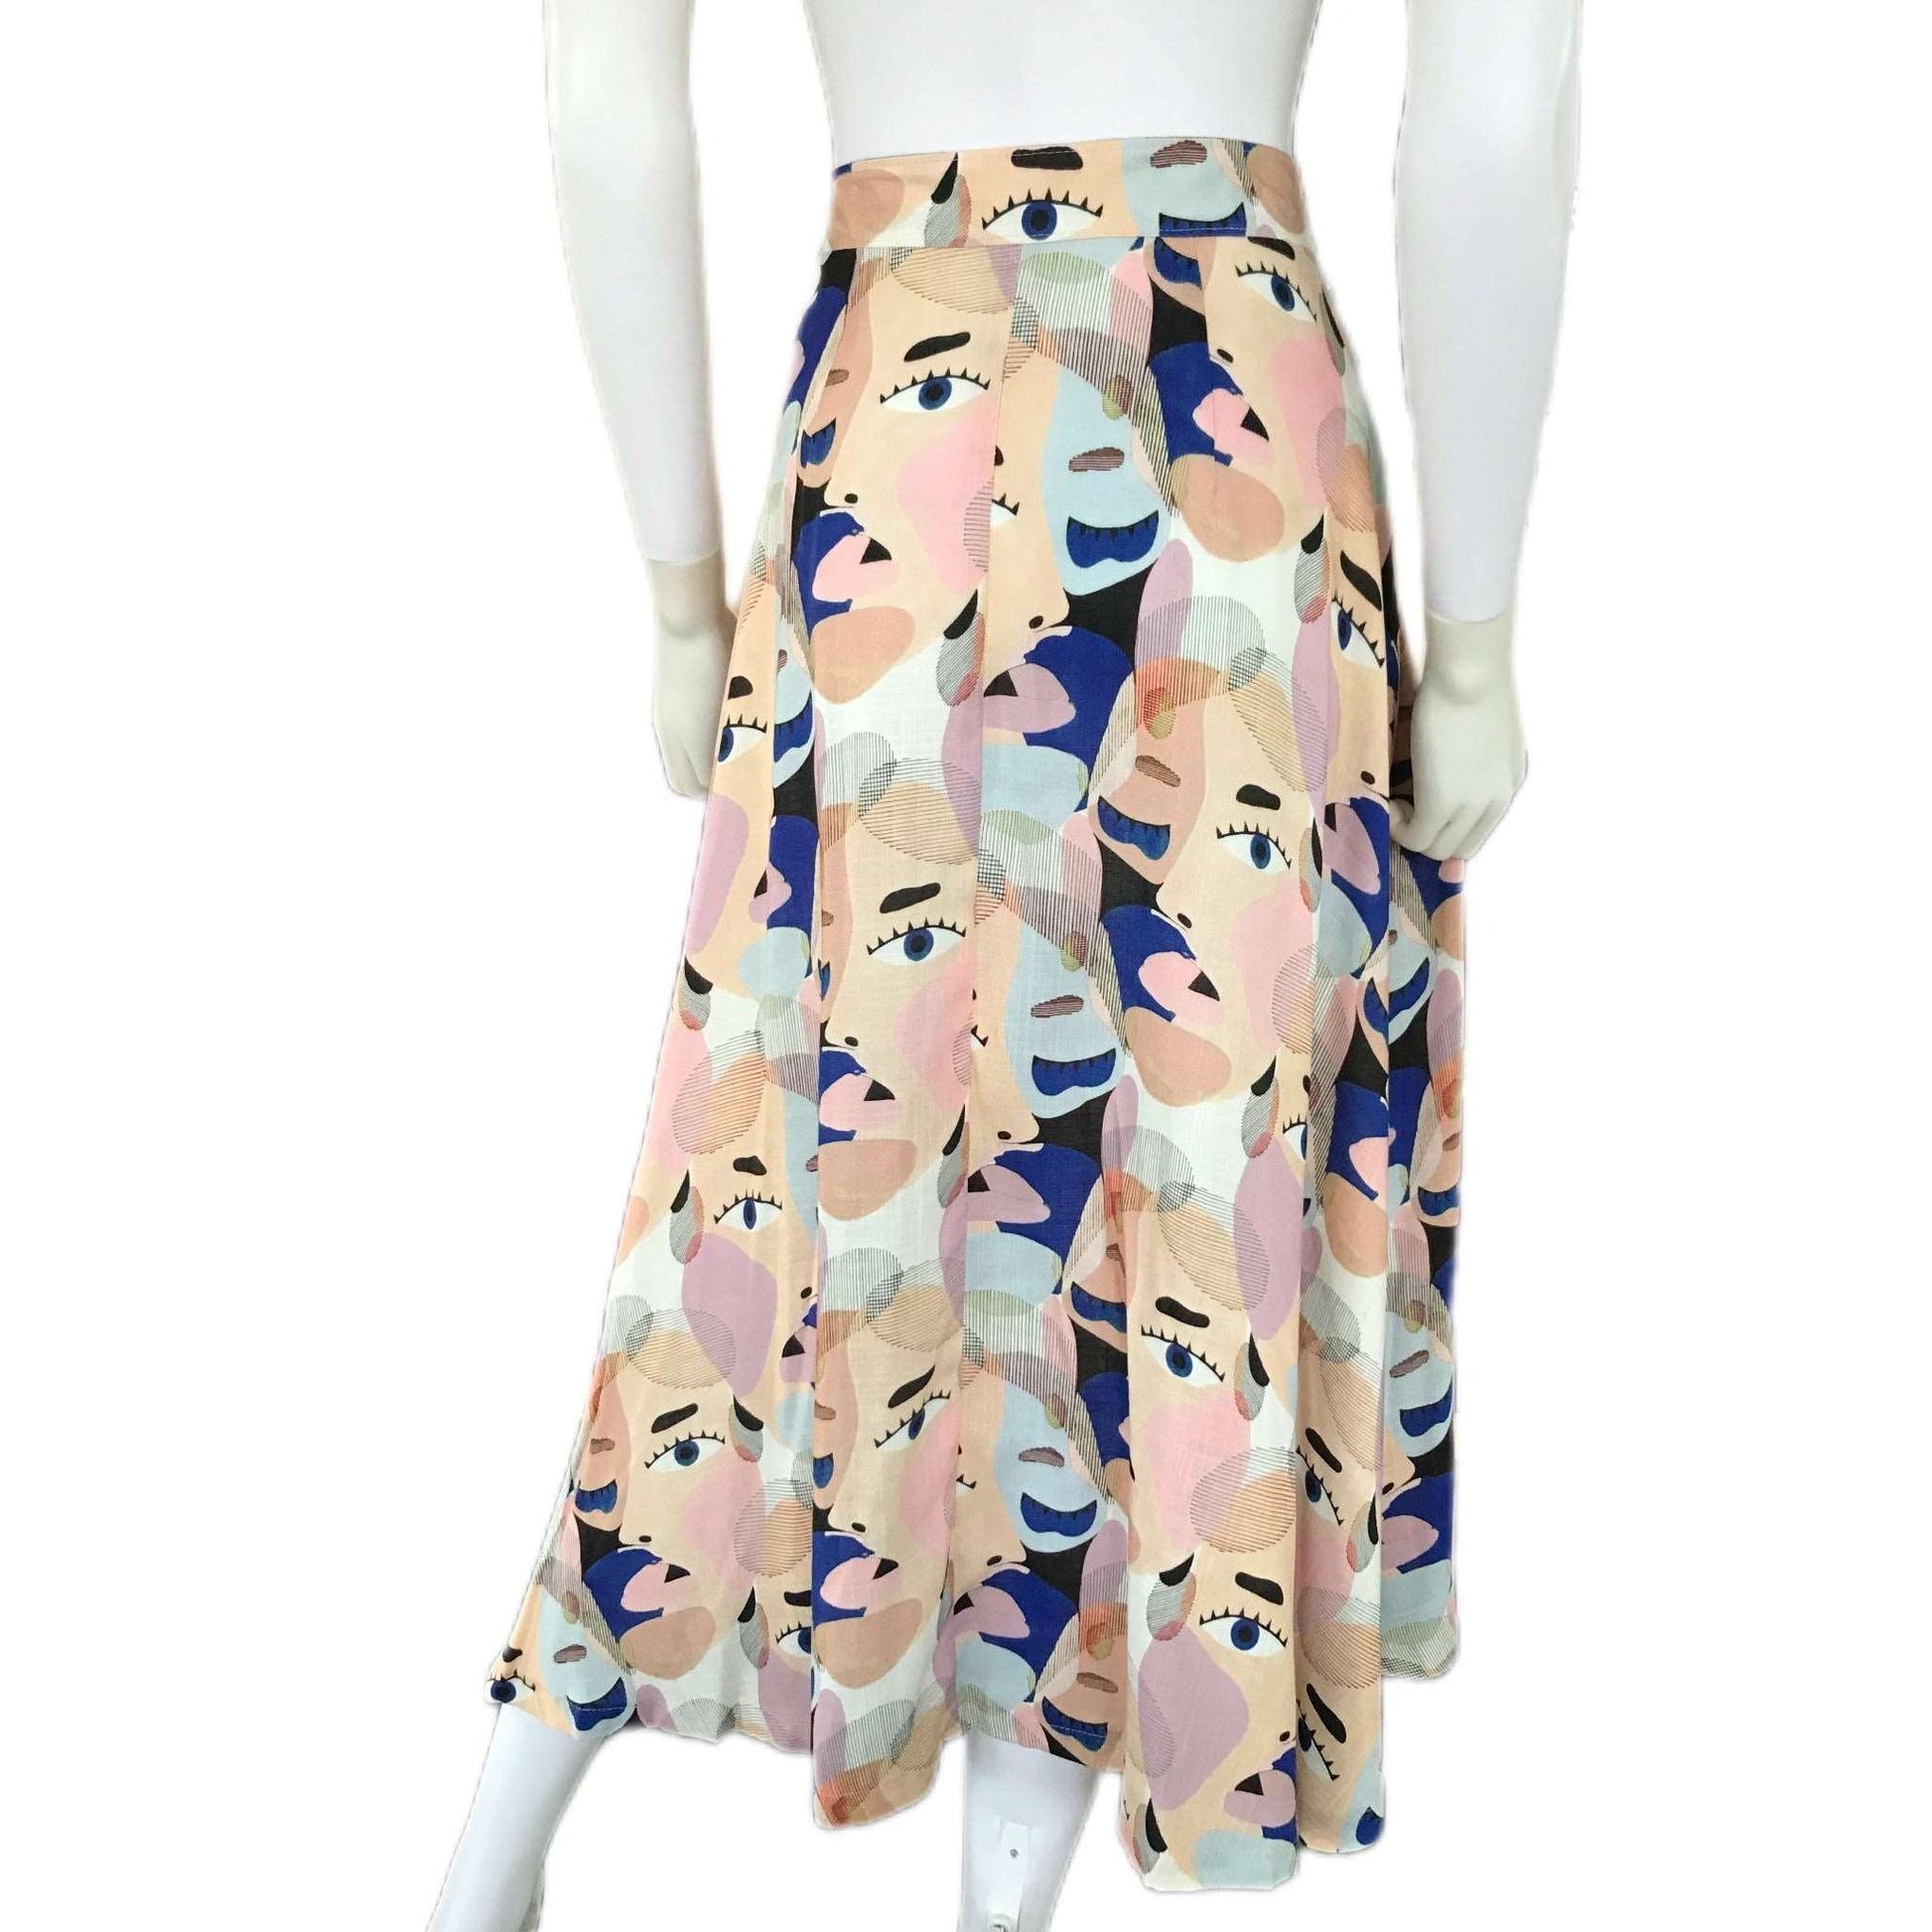 Conversations Women's Midi Skirt with Abstract Faces - Size Small